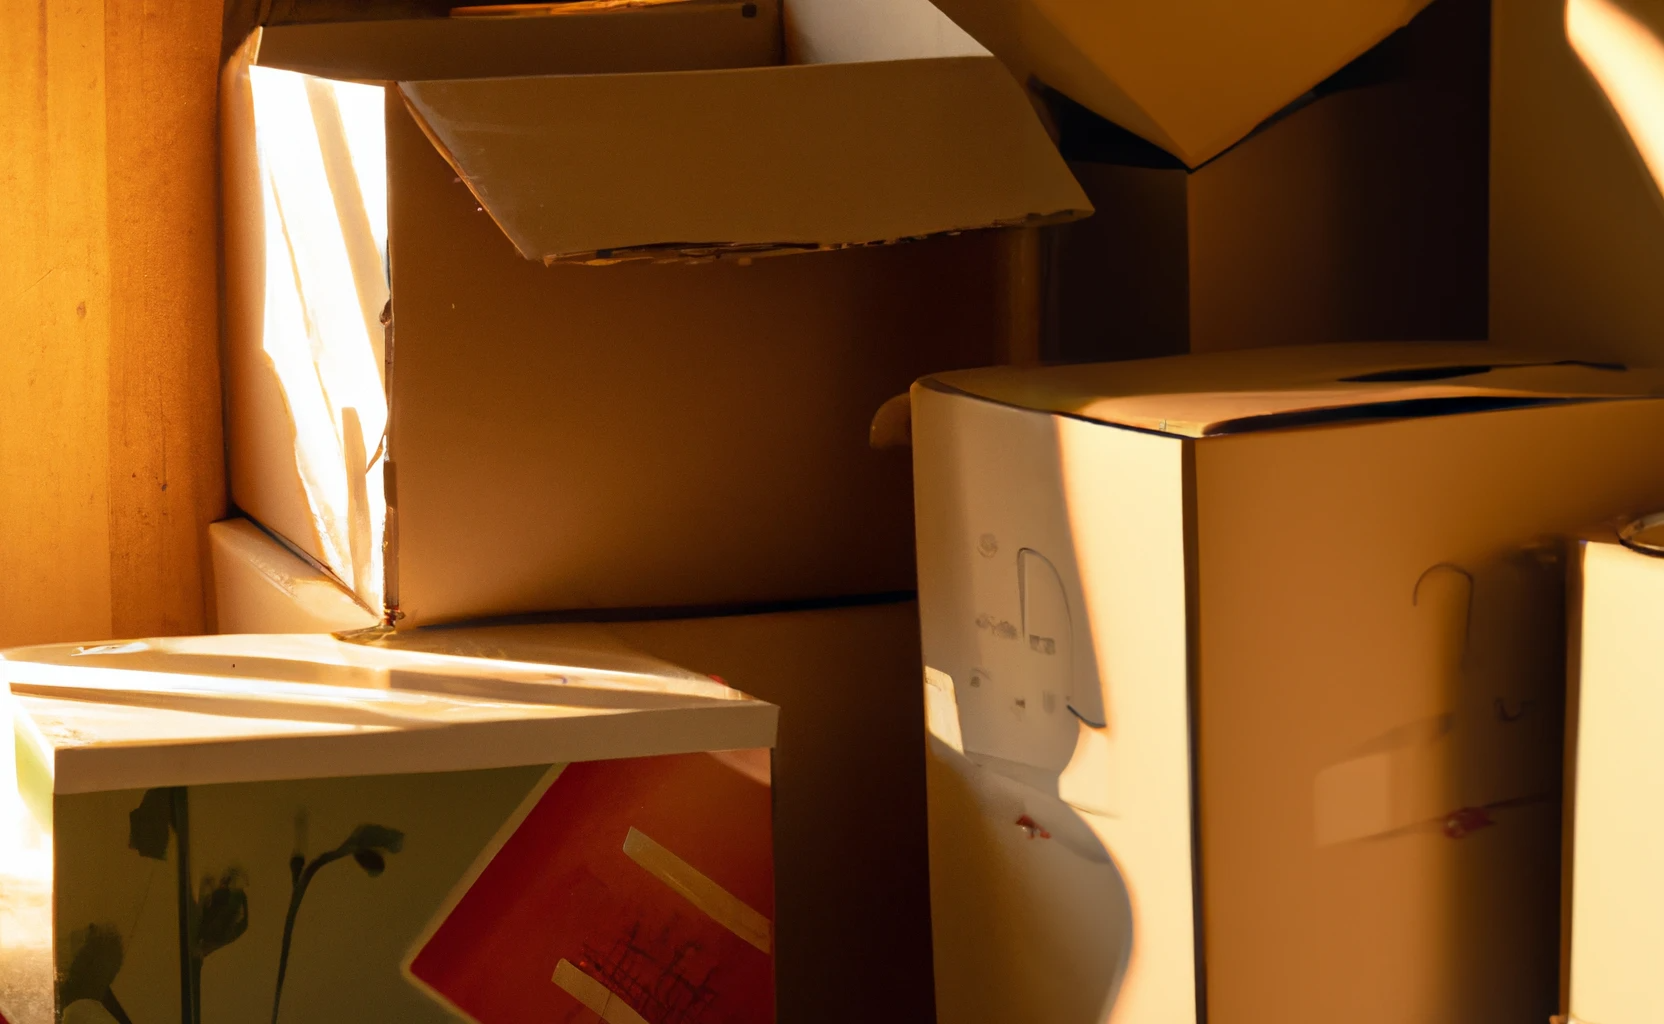 Daniel Graves Stillwater MN Realtor - Downsizing Tips for Older Adults - Moving Boxes